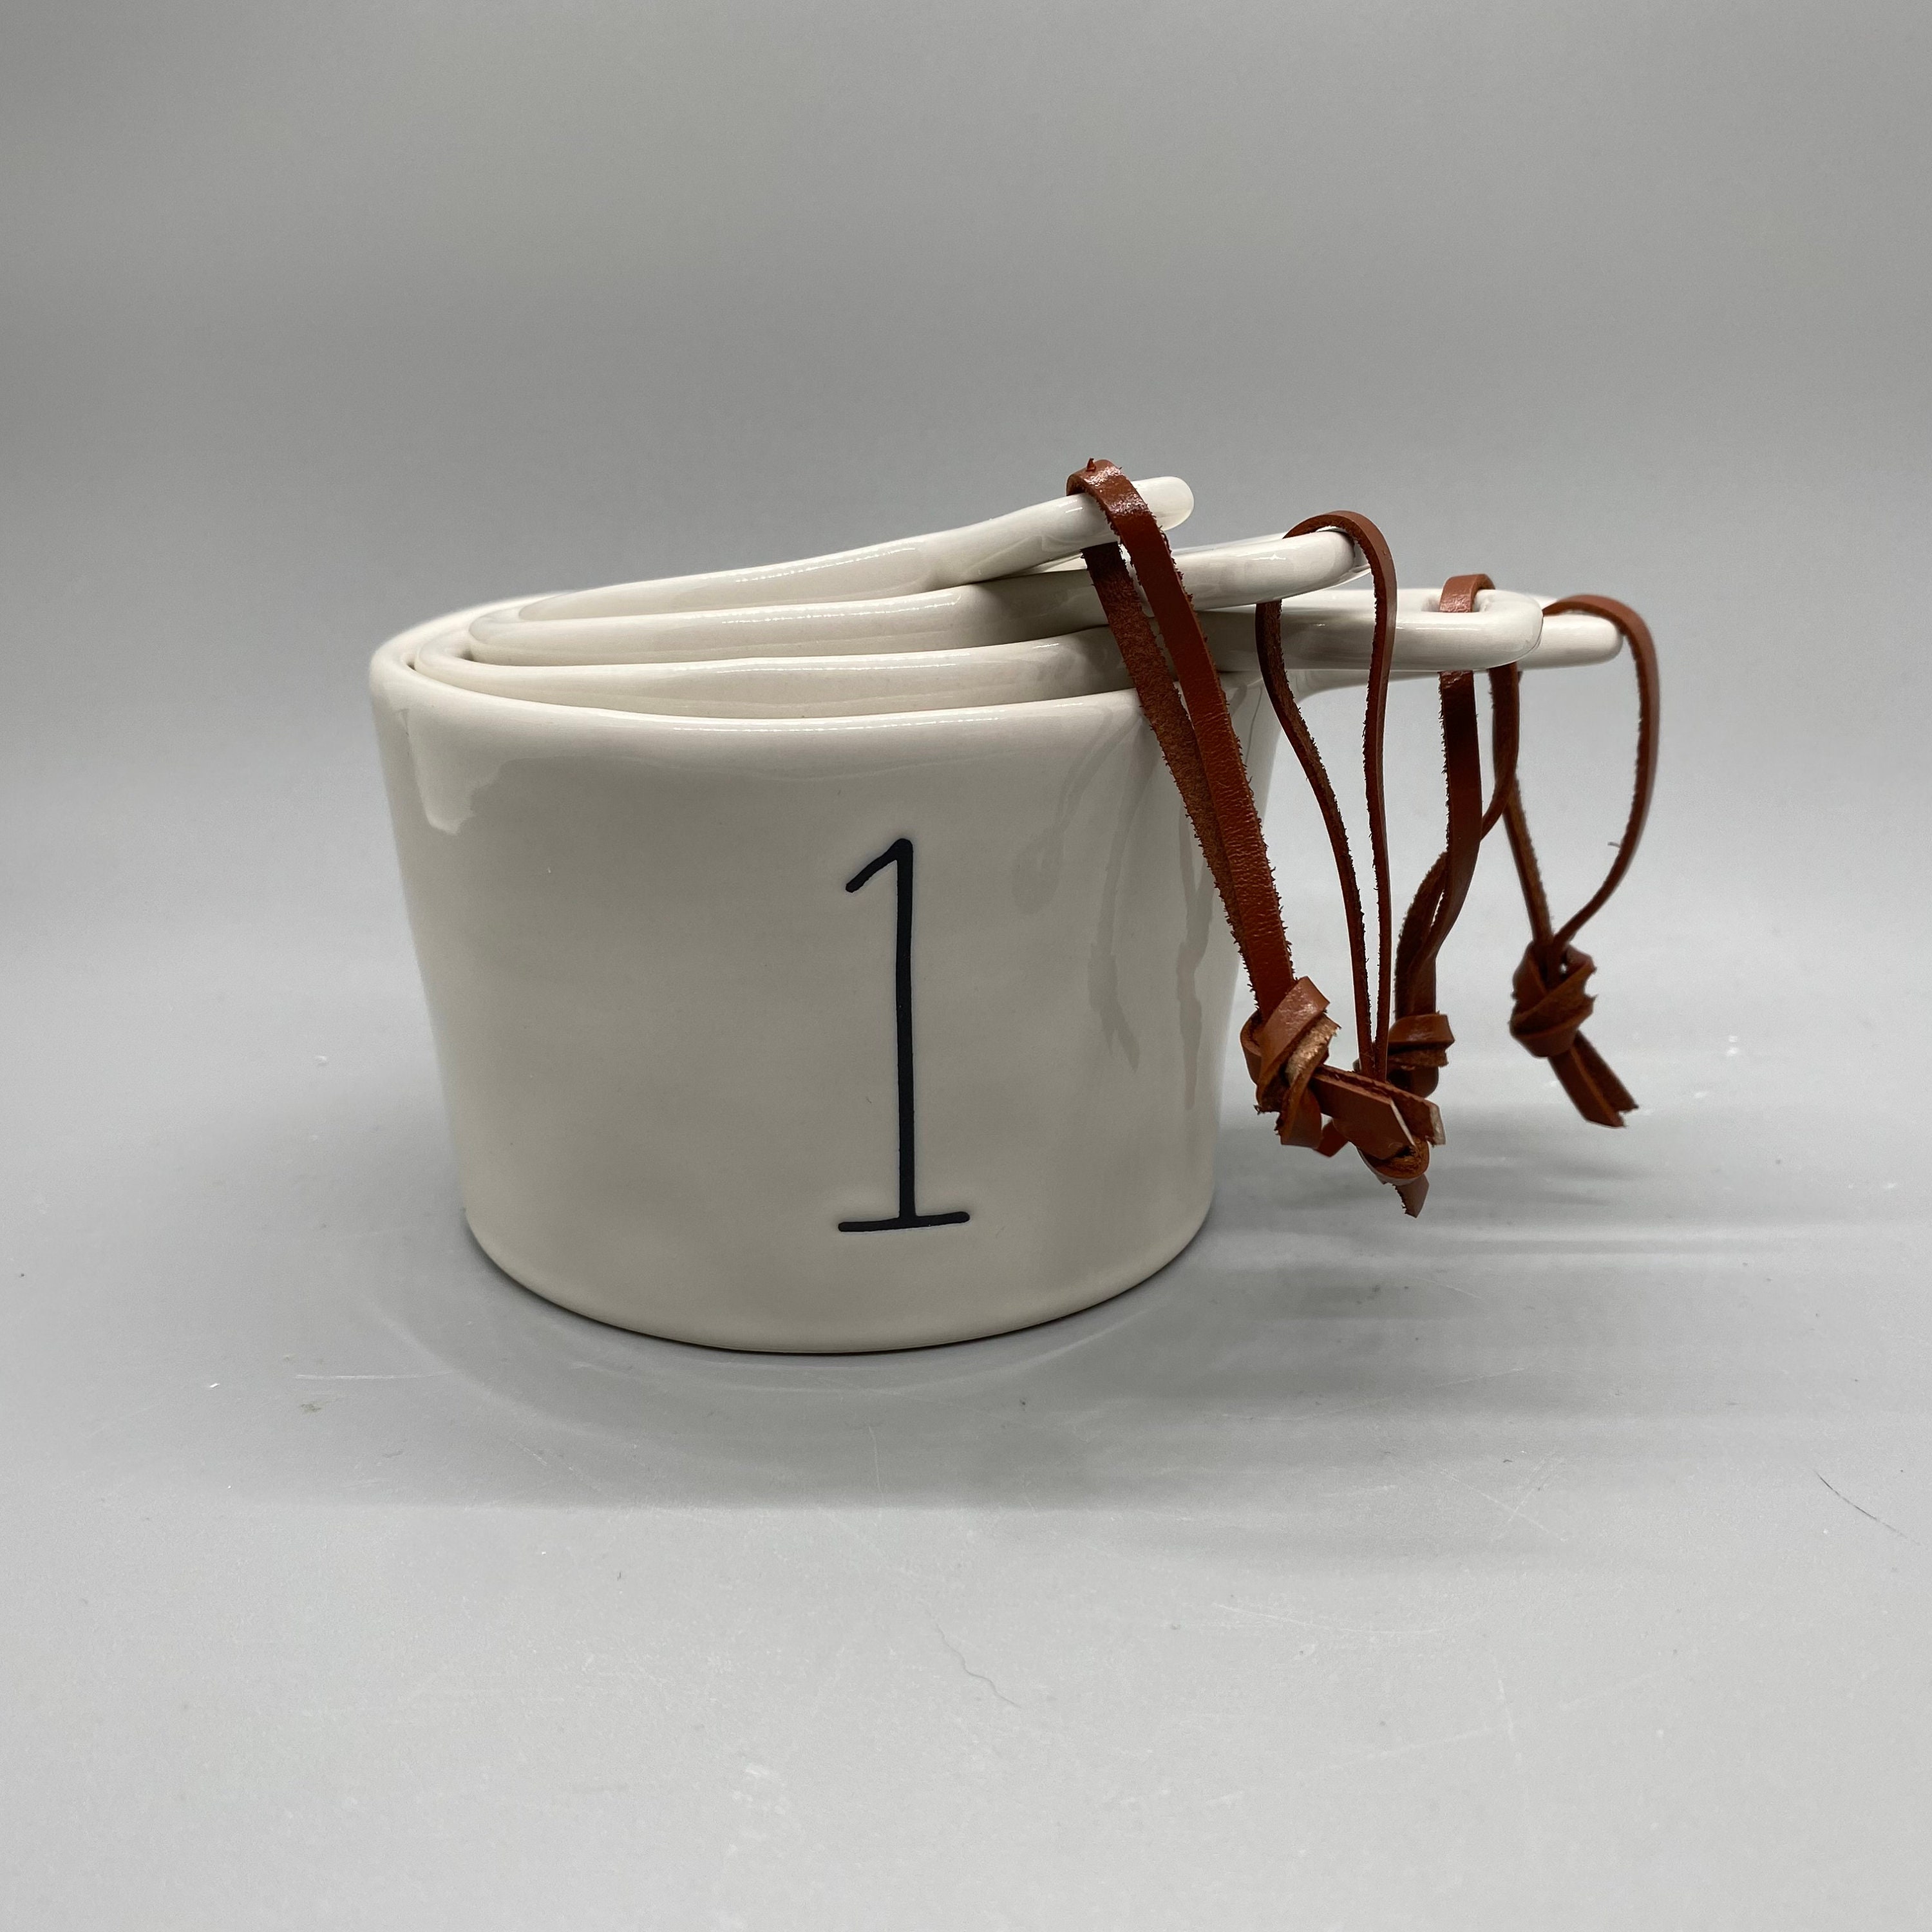 New style Rae Dunn white ceramic leather tie handled measuring cup set